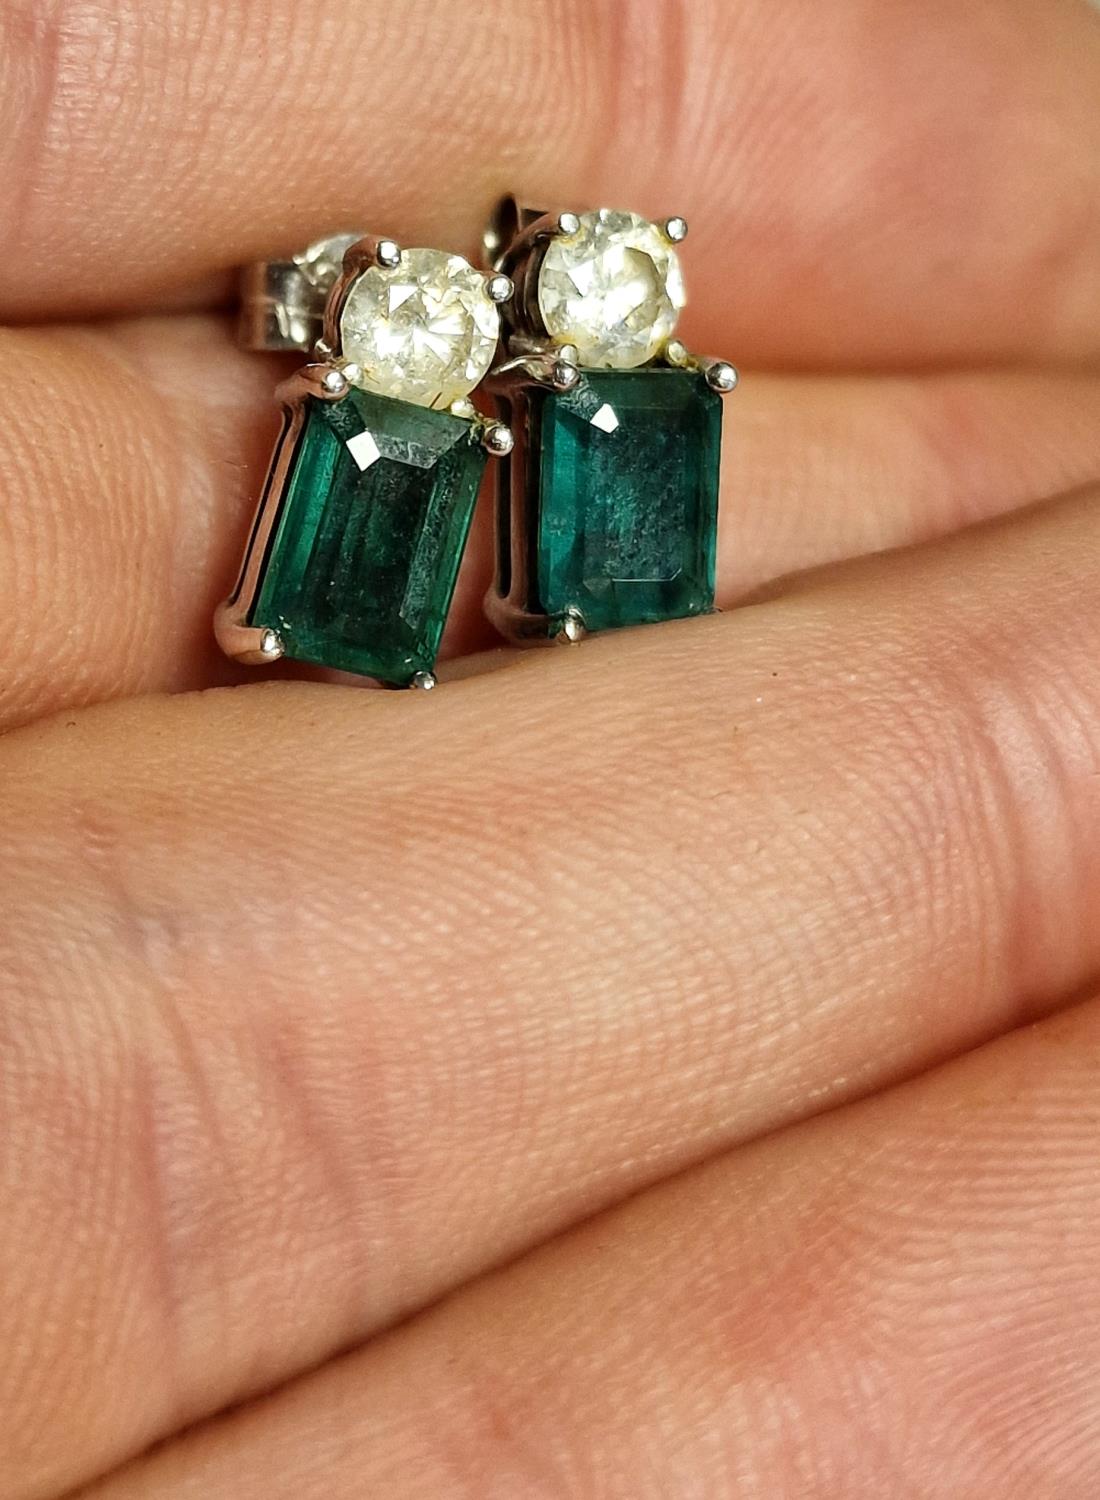 Pair of 18ct White Gold, Emerald & Diamond Stud Earrings - each set with single 1ct emerald cut ston - Image 2 of 3